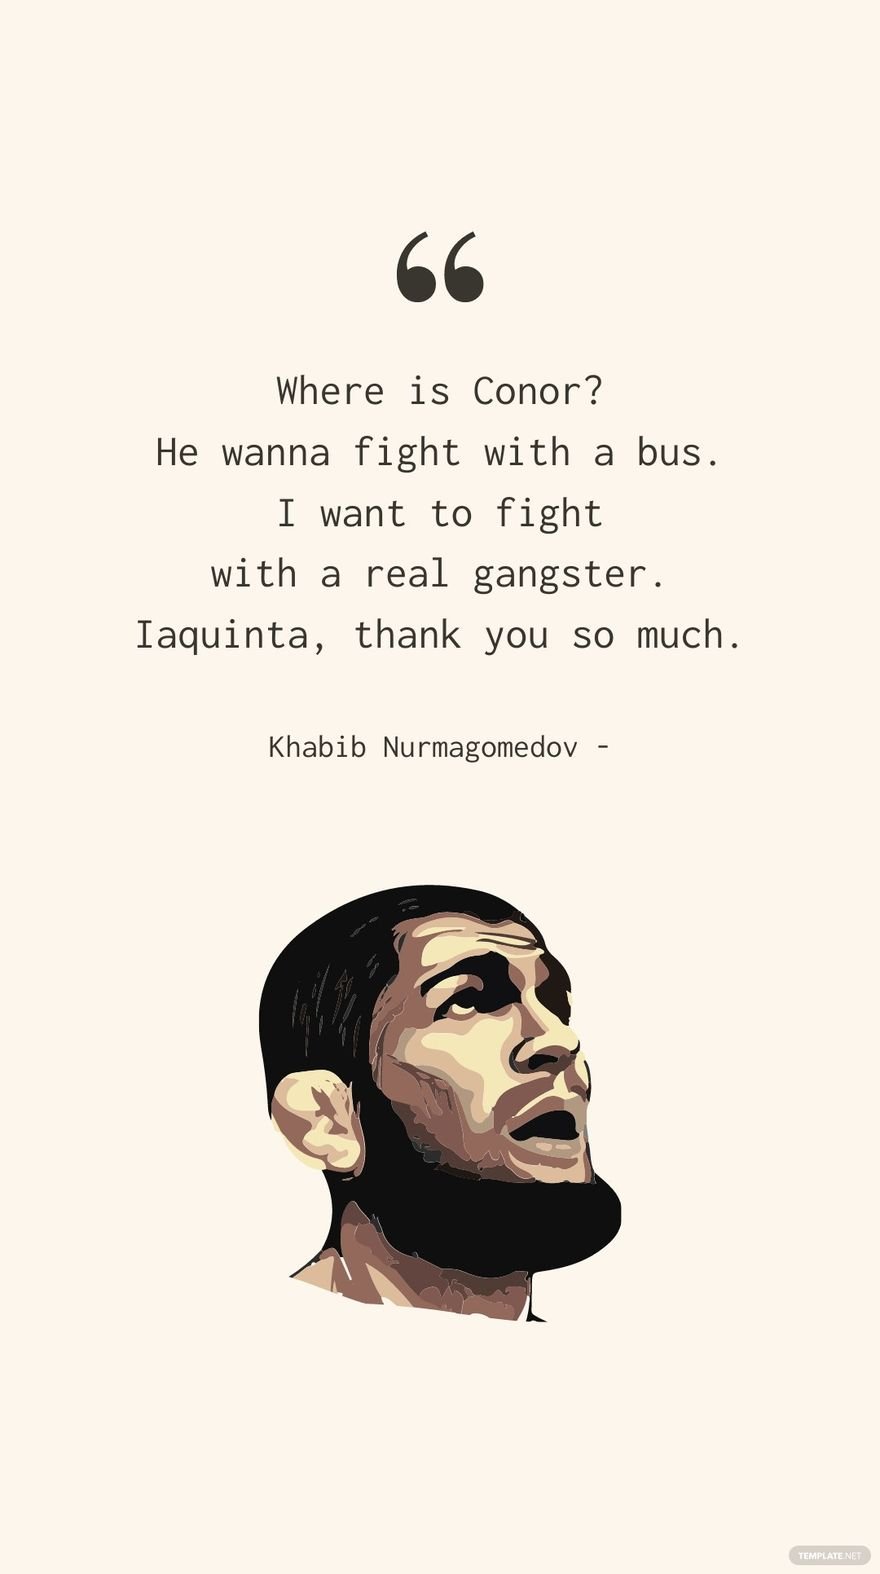 Free Khabib Nurmagomedov - Where is Conor? He wanna fight with a bus. I want to fight with a real gangster. Iaquinta, thank you so much. in JPG